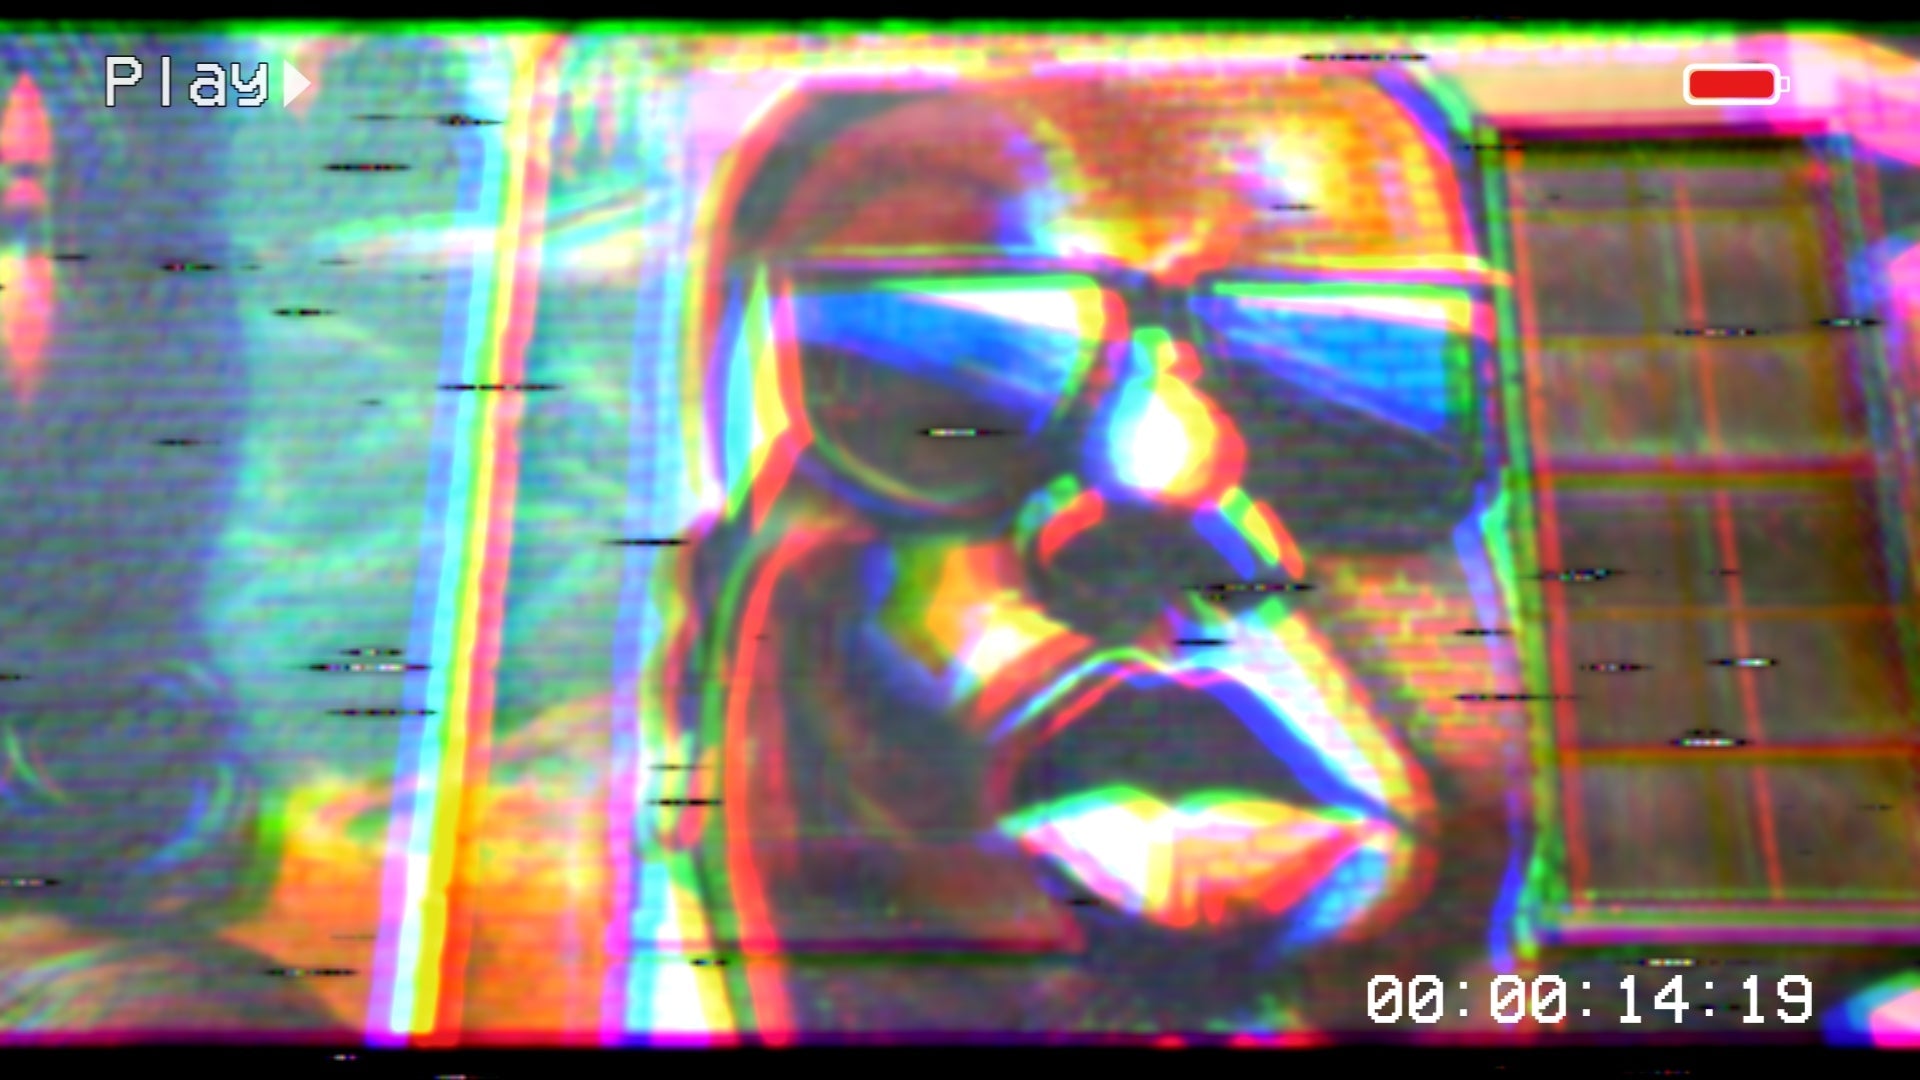 example of VHS overlay